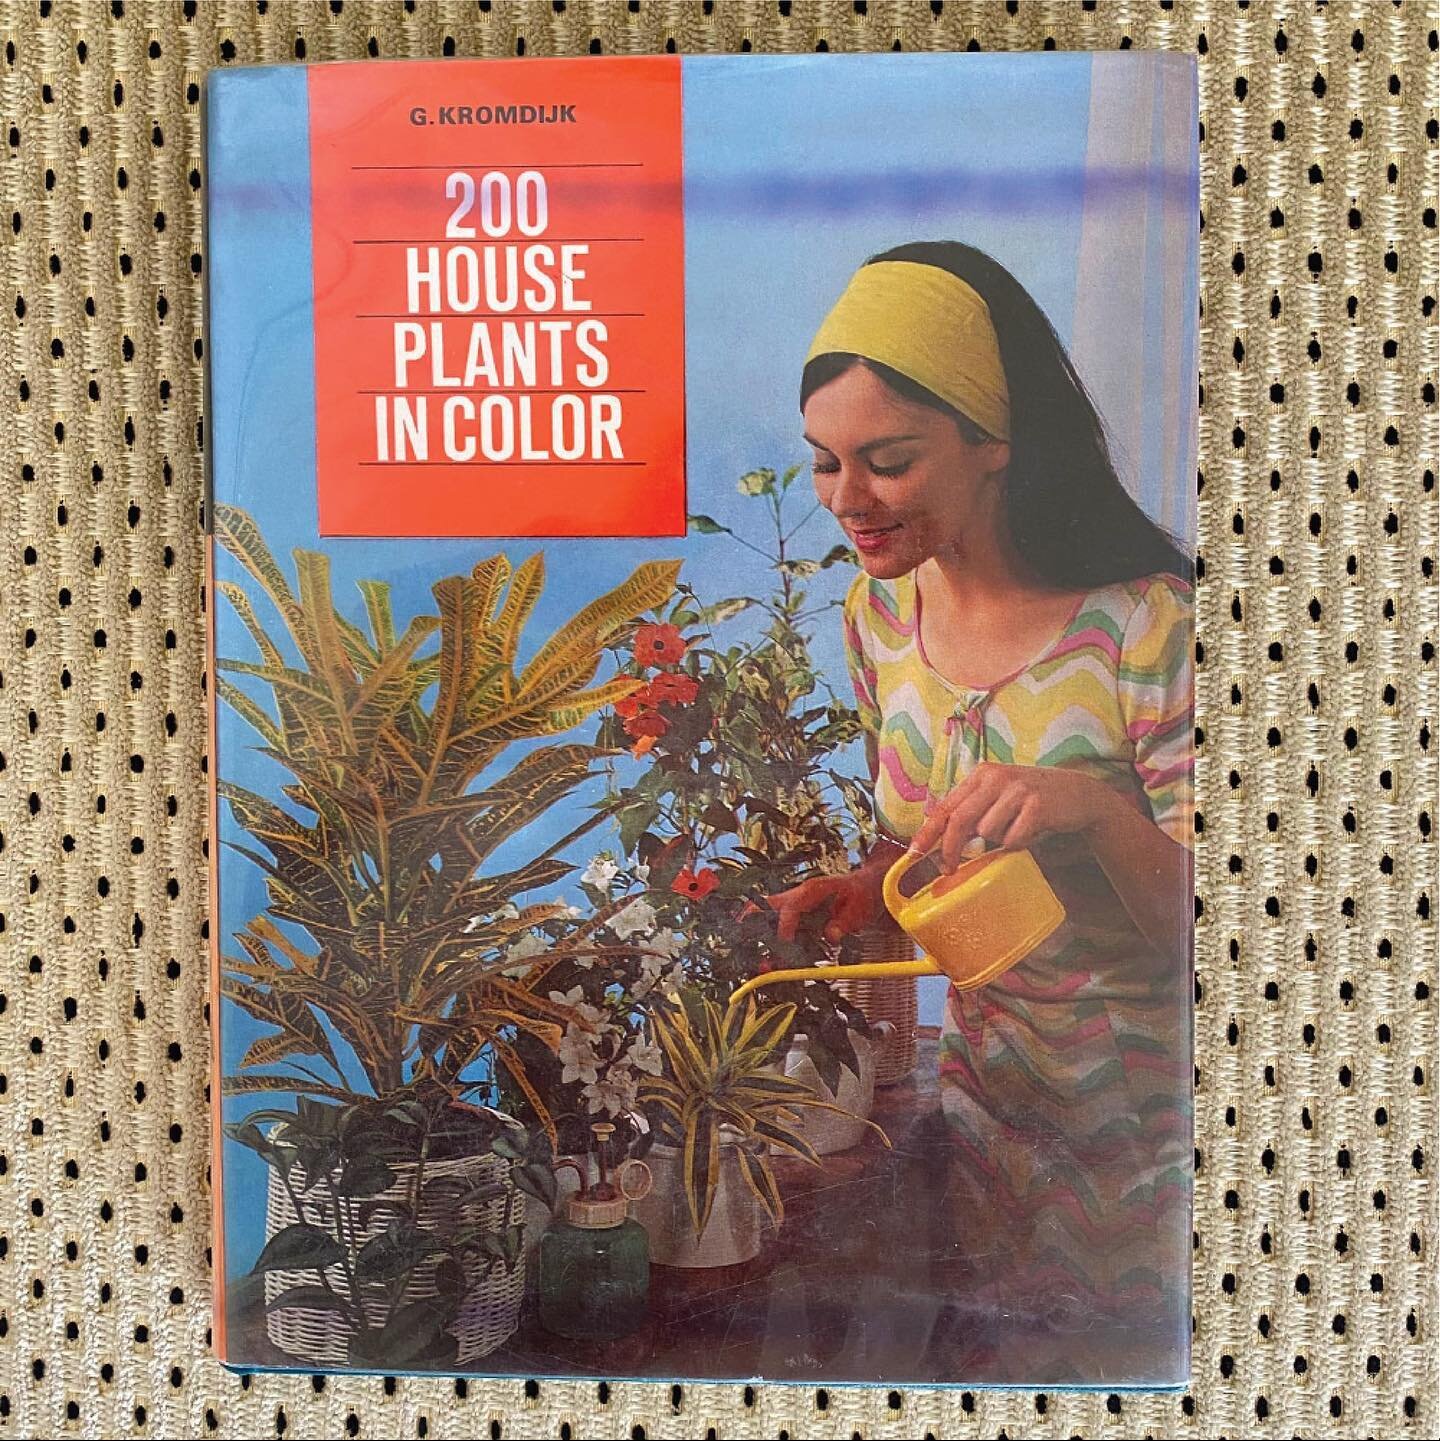 &ldquo;The ancestors of our house plants were wild&rdquo; 

200 House Plants in Color, 1973
Herder and Herder, By G.Kromdijk

#croton #tradescantiazebrina #inchplant  #montseradeliciosa #montsera #swisscheeseplant #cactus #chamaecereussilvestrii #pea